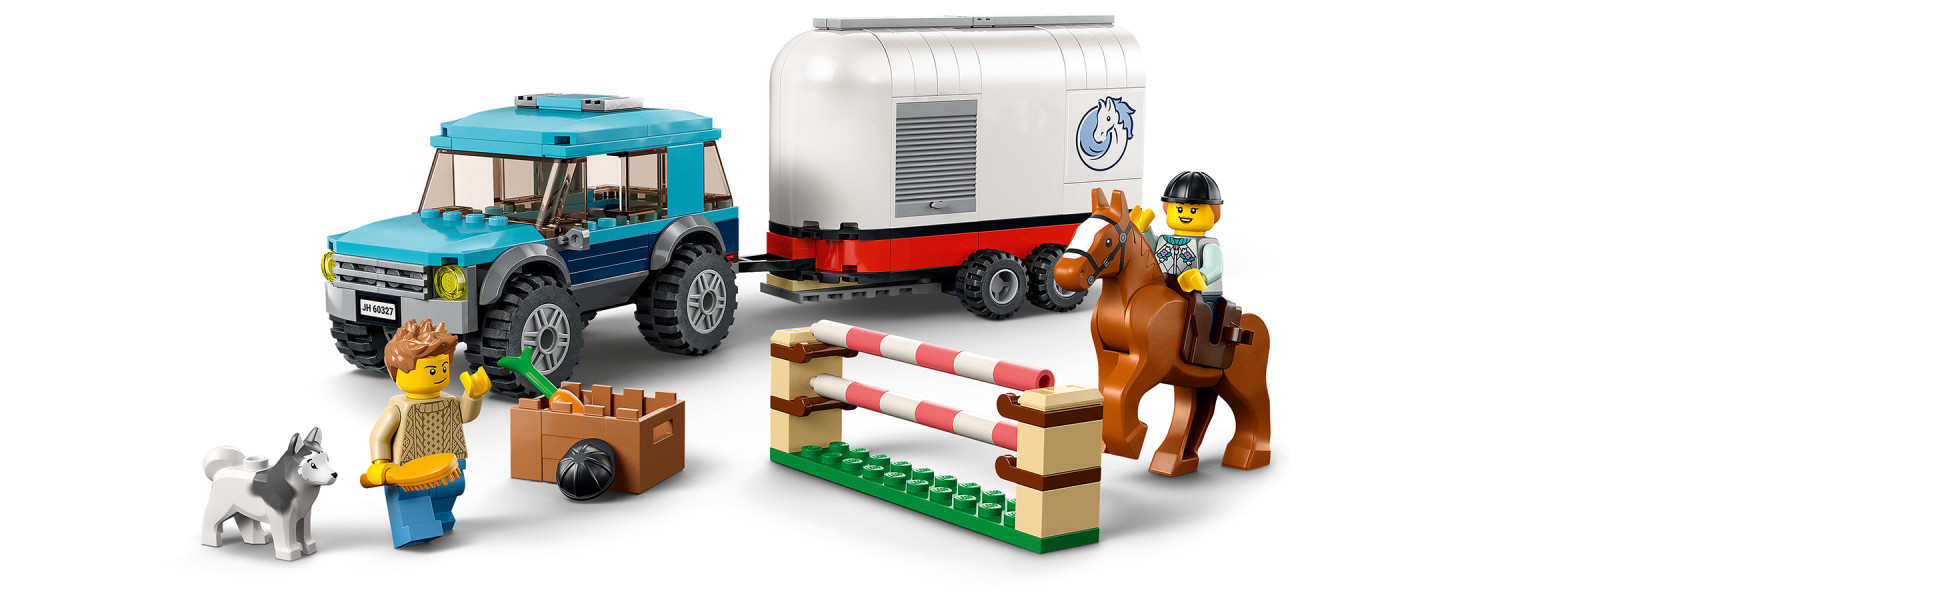 LEGO 60327 City Great Vehicles Horse Transporter Set, with SUV Toy Car,  Trailer, Horse Figure and Jump, Gift Idea for Grandchildren, Kids, Boys & 